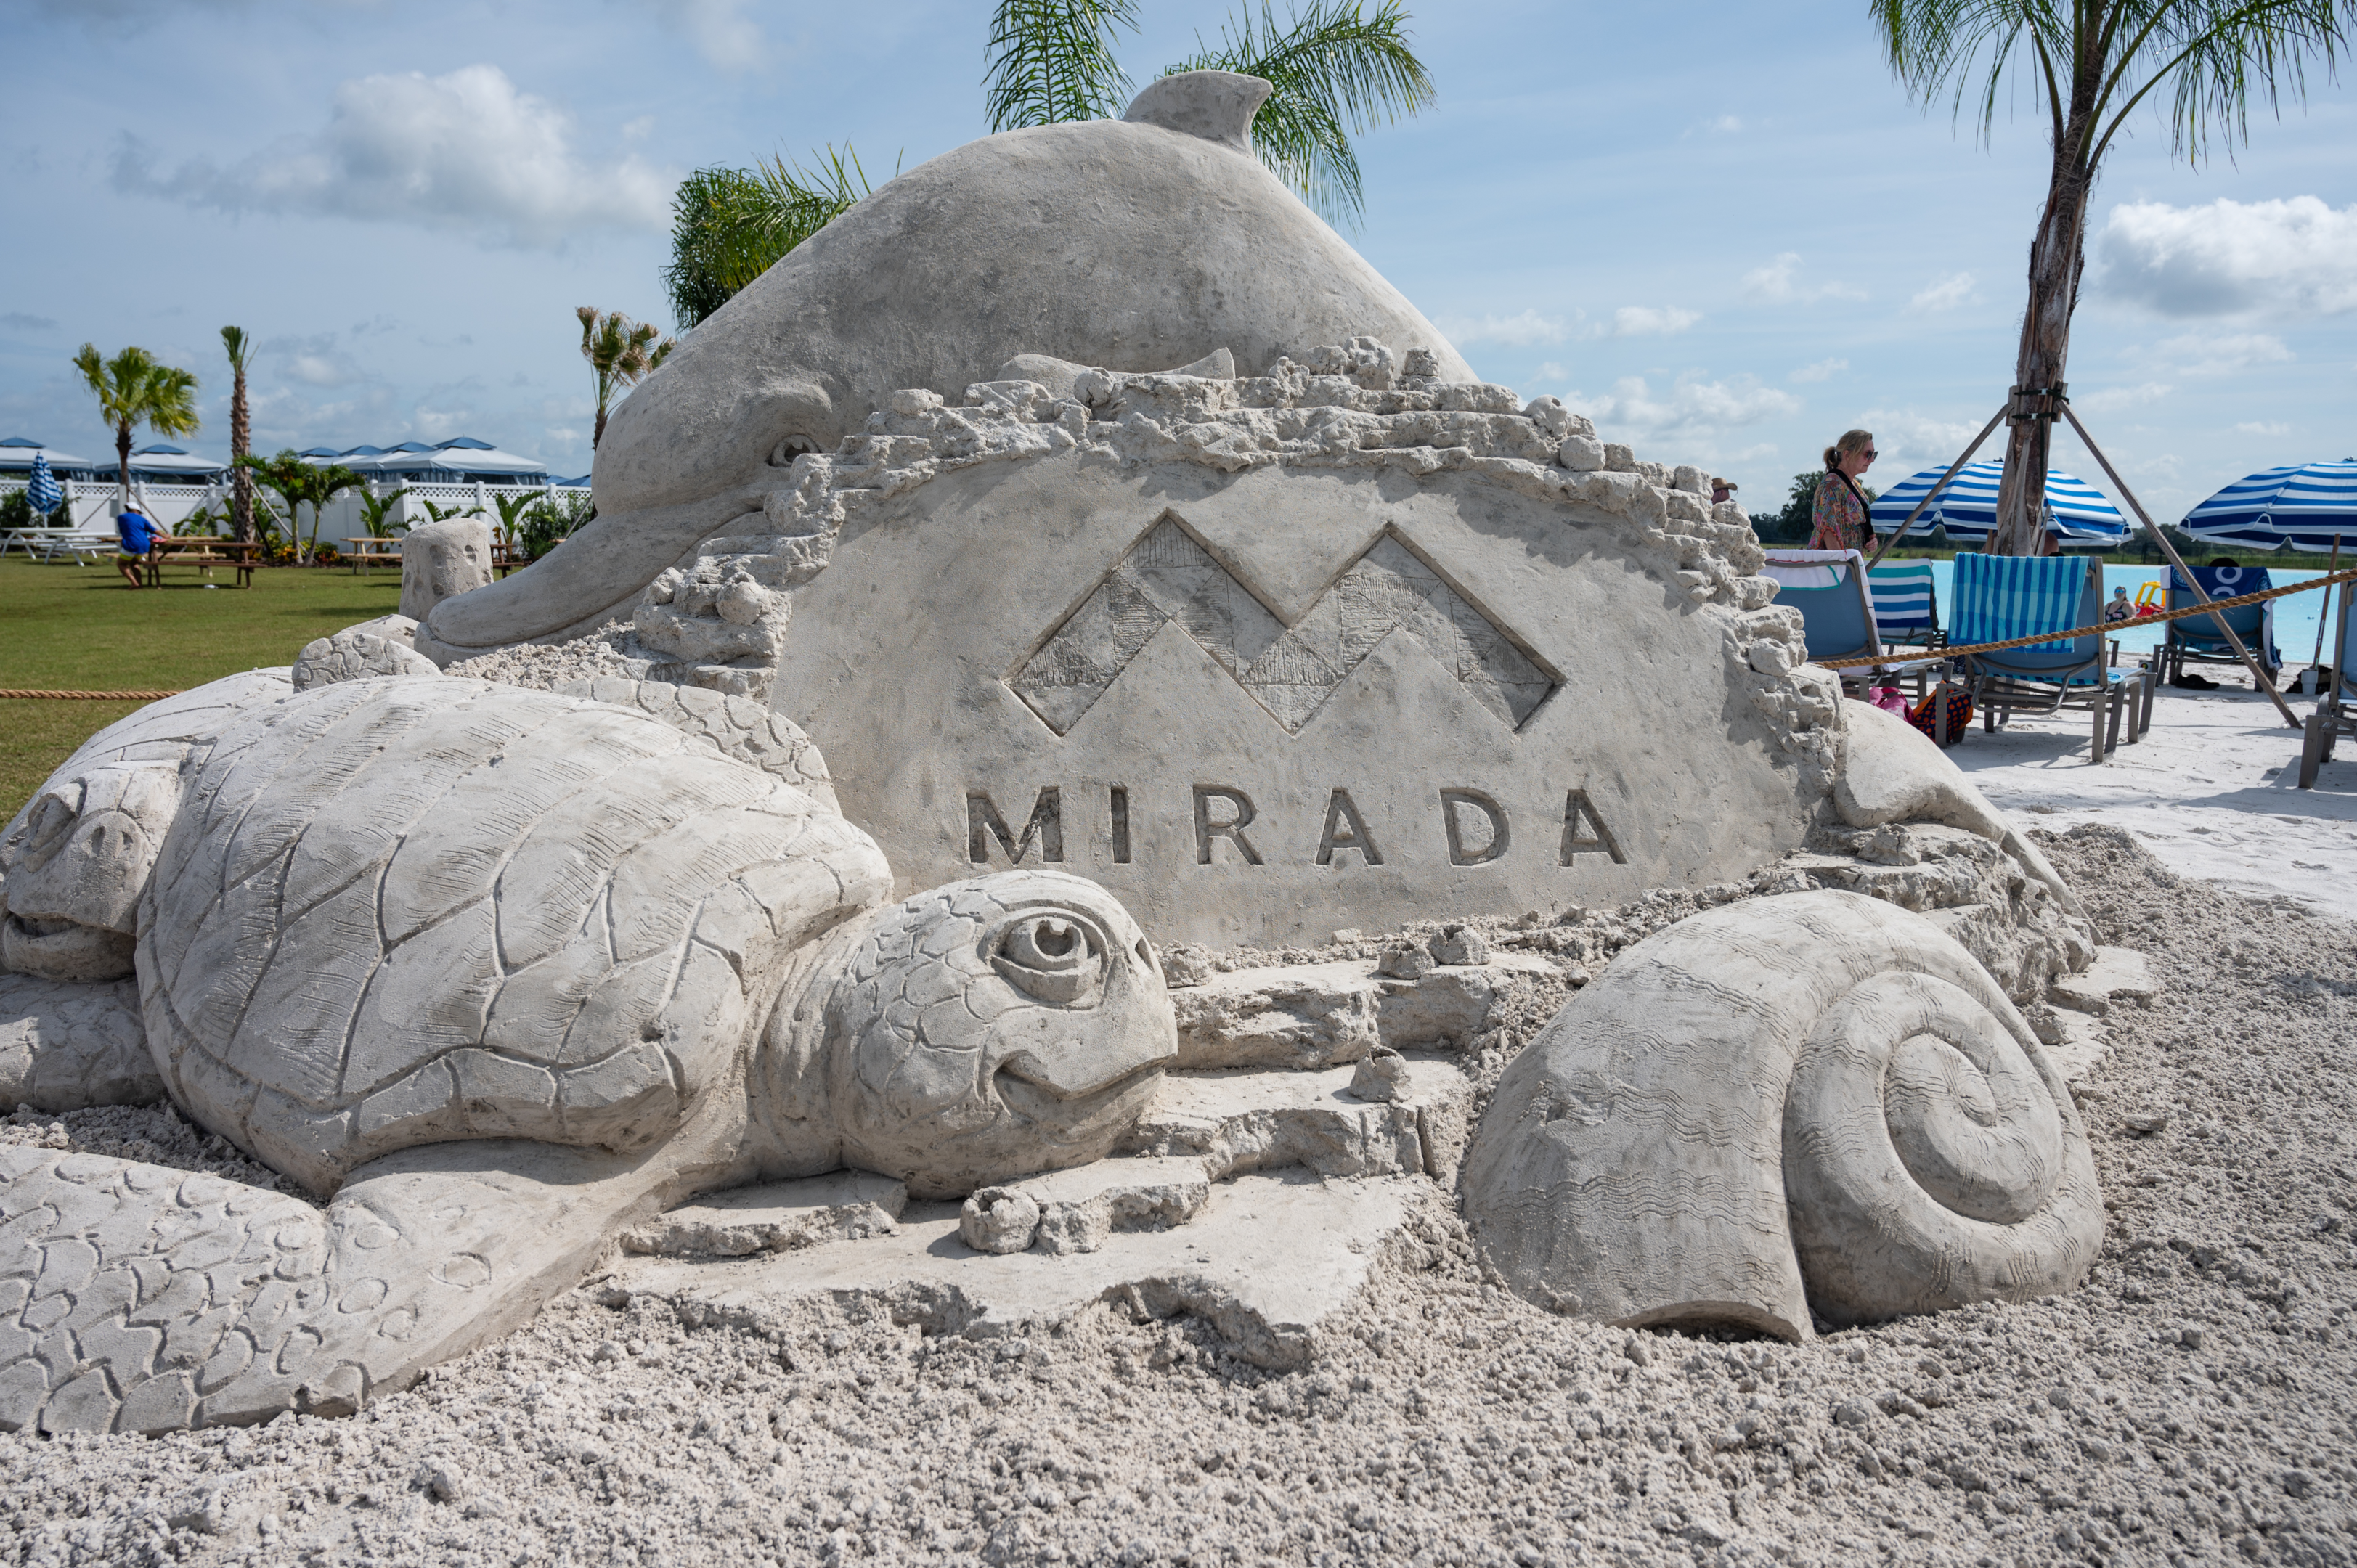 A sand sculpture form Sandtastic Sand featuring a sea shell and turtle with the Mirada logo